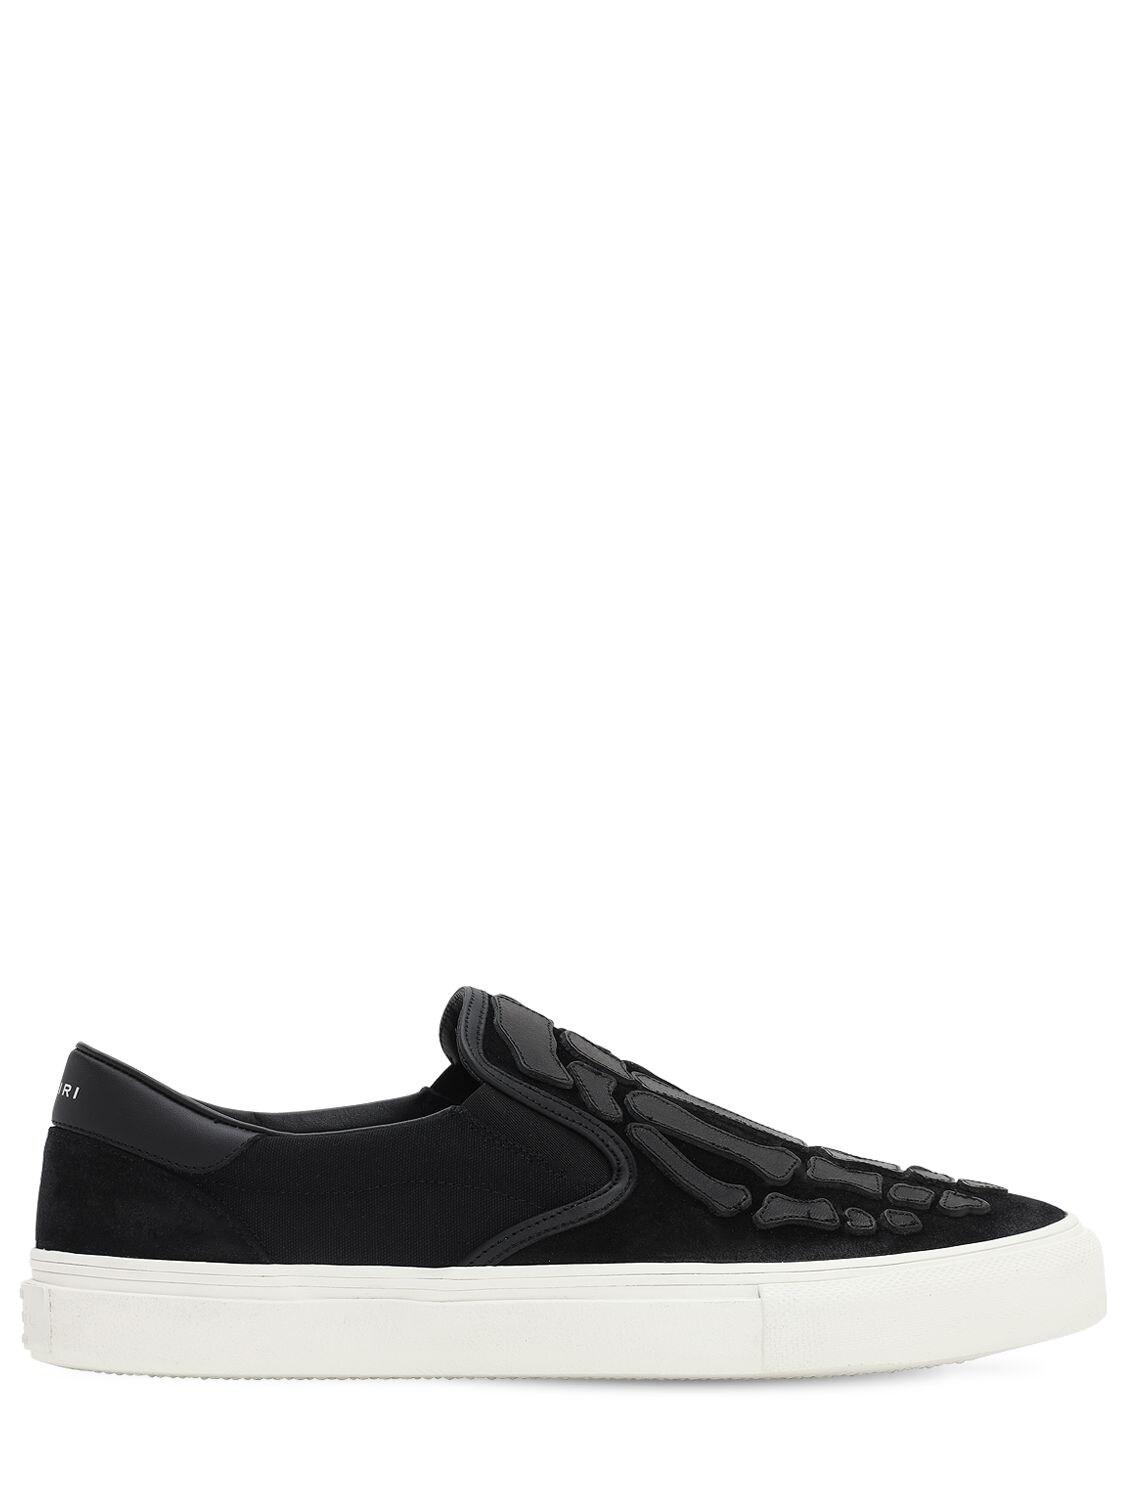 Amiri Leather & Suede Slip-on Sneakers in Black for Men - Save 6% - Lyst